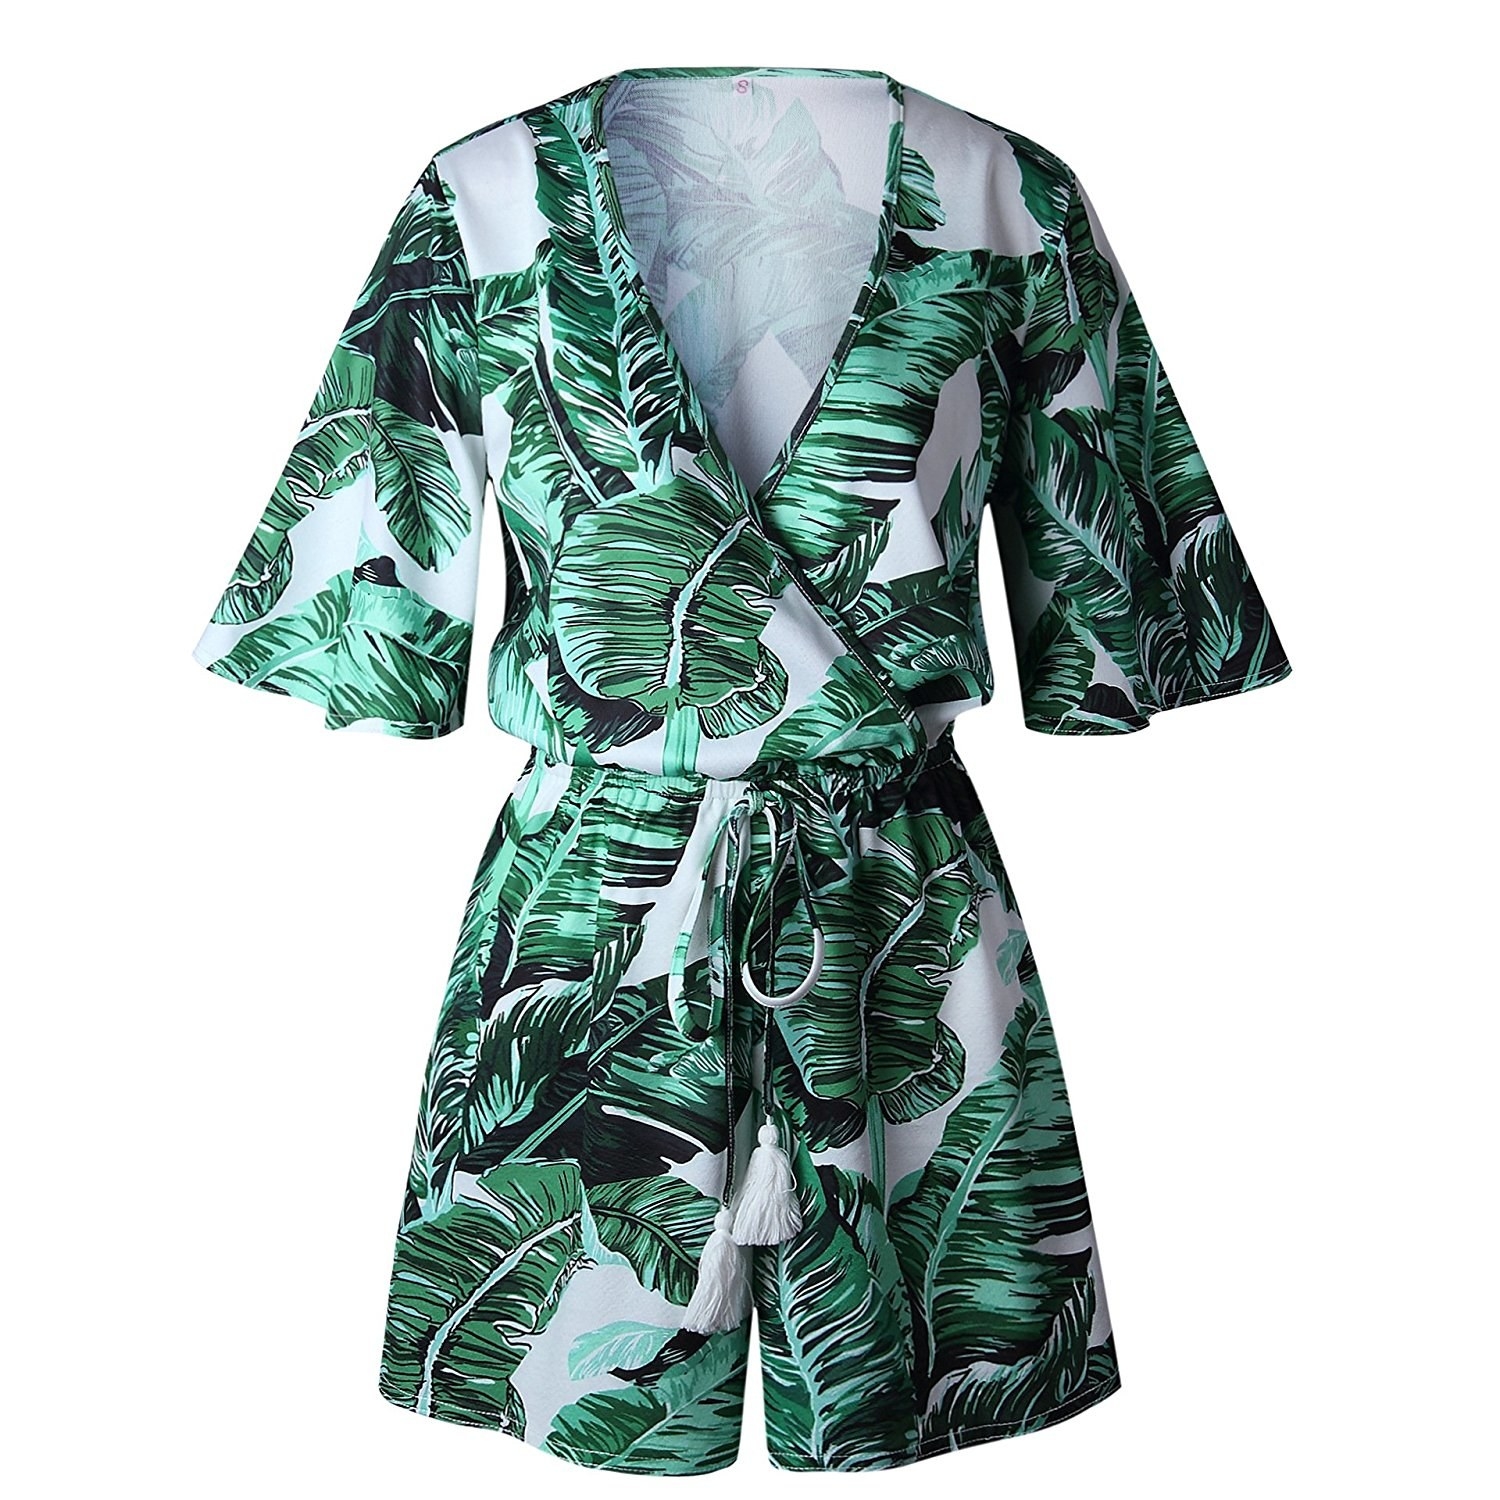 25 Gorgeous And Inexpensive Rompers You'll Want In Your Closet ASAP